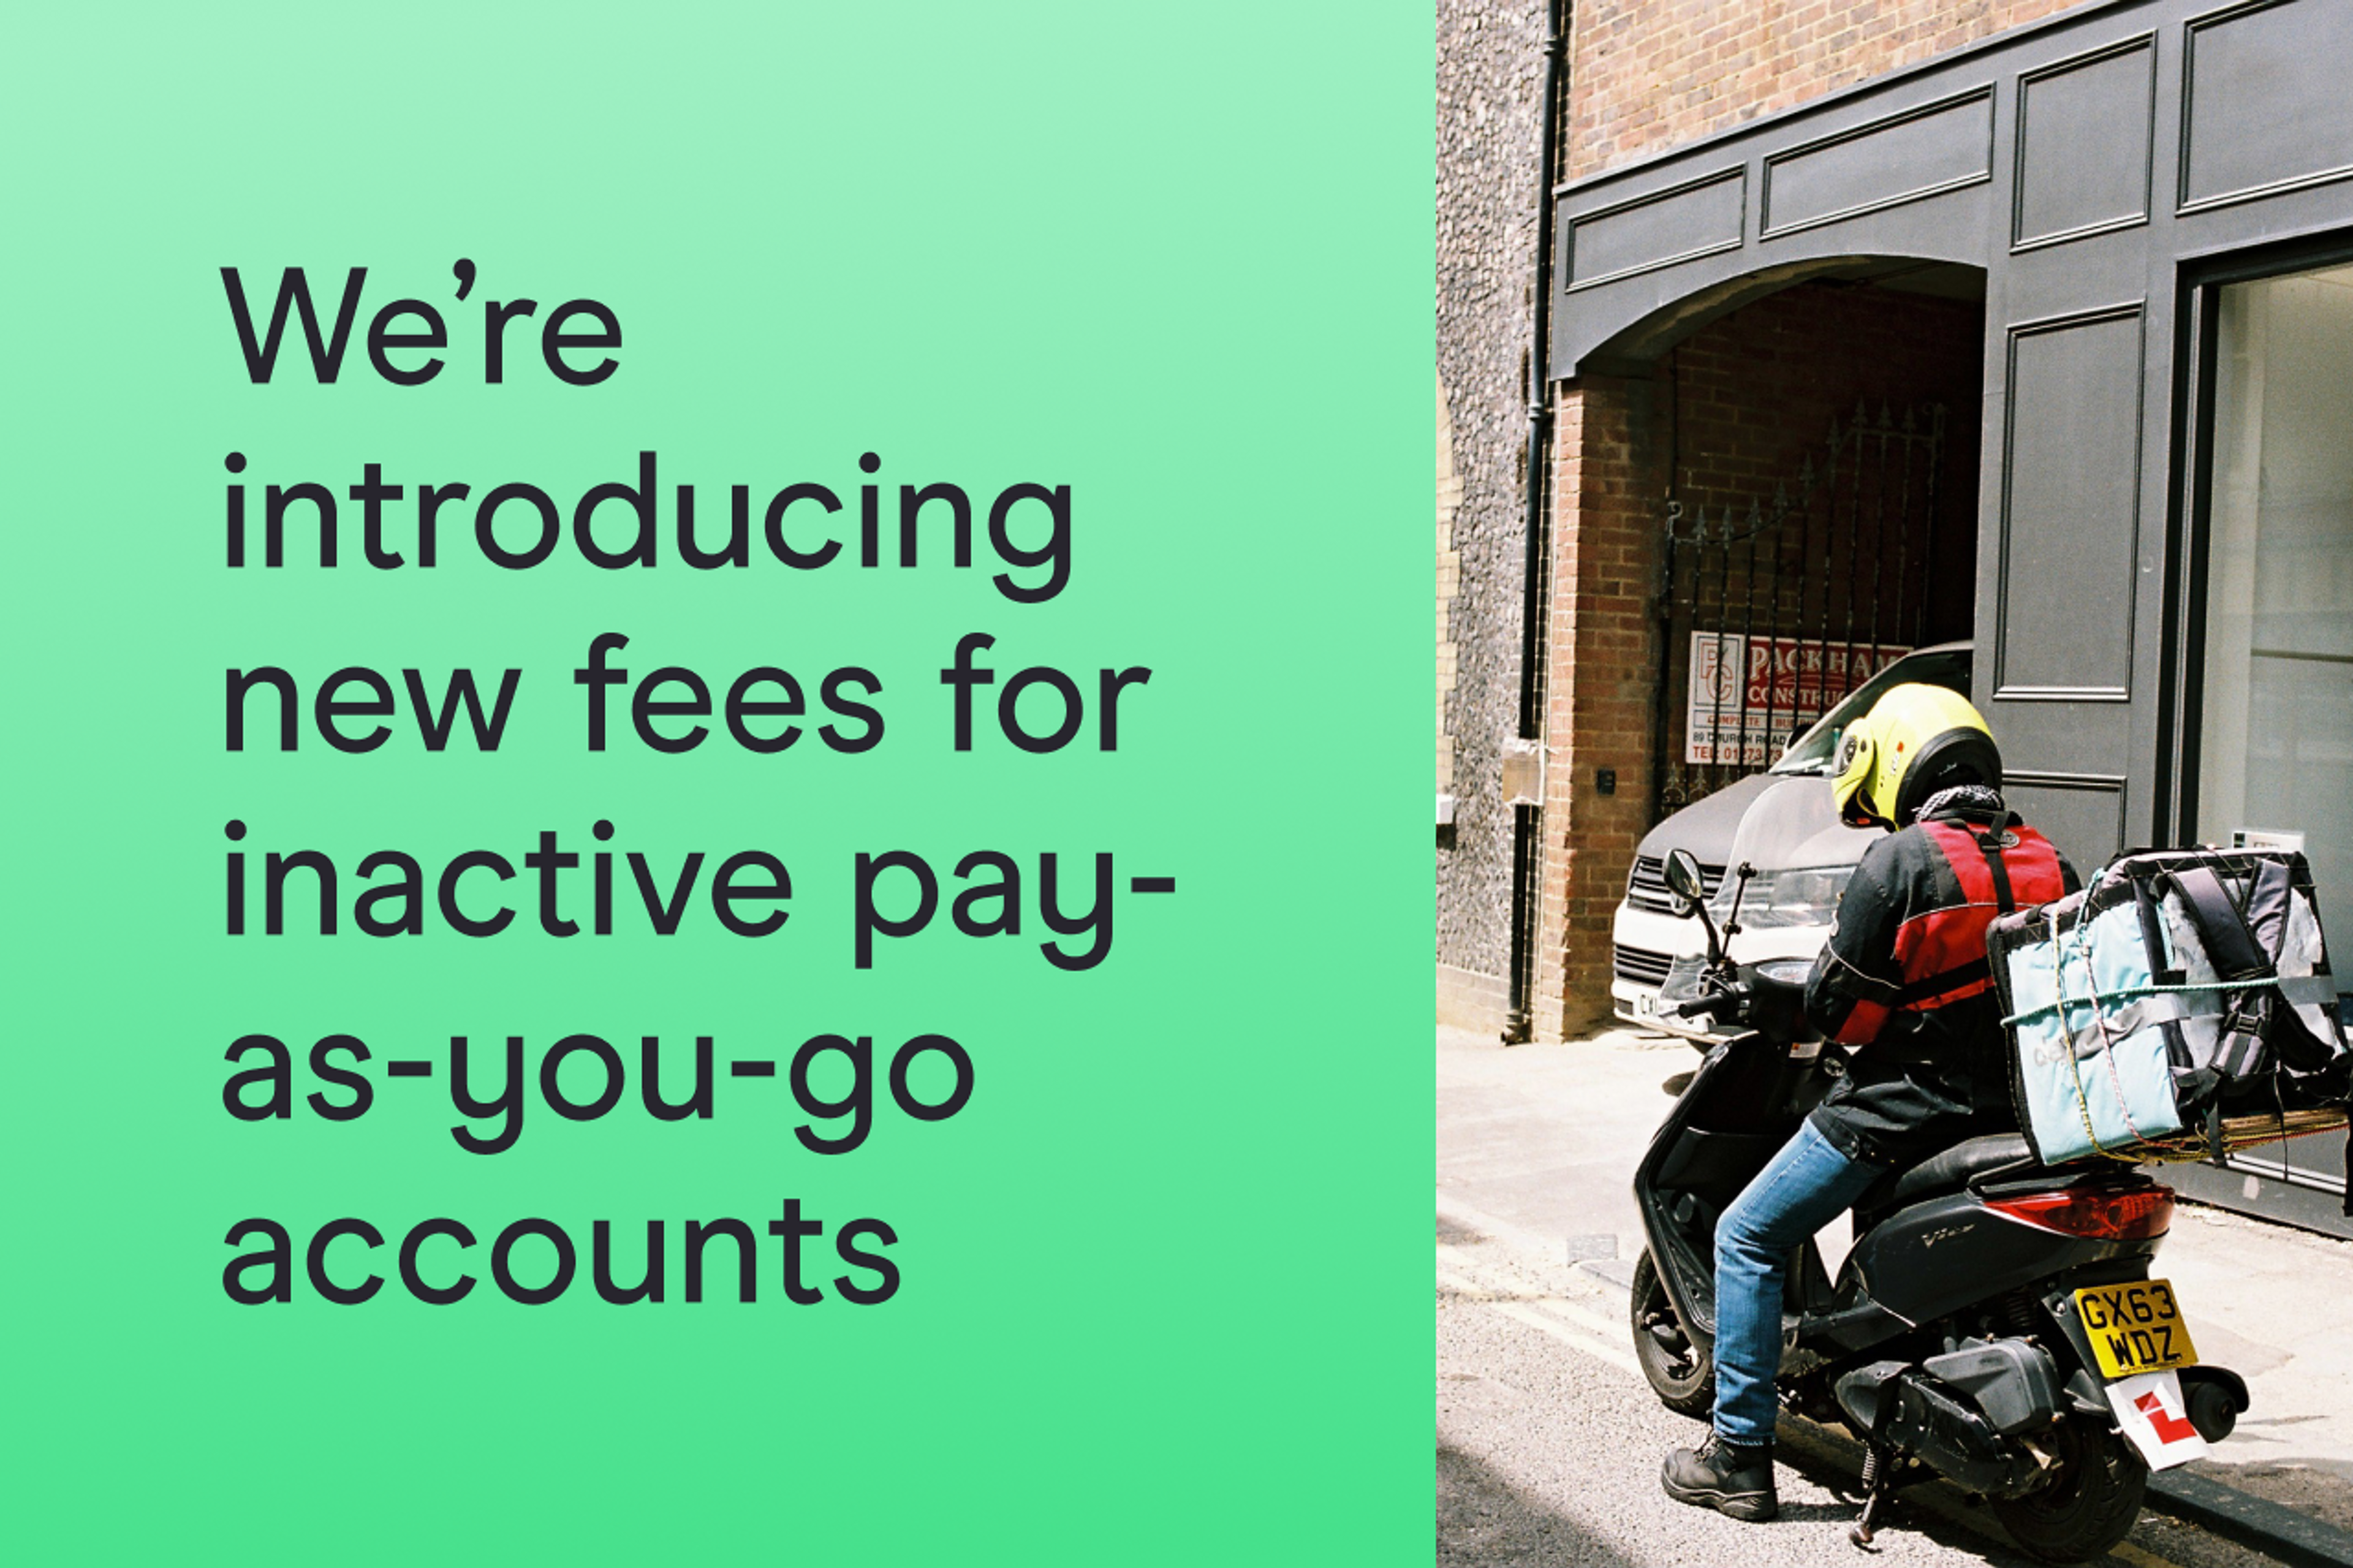 We’re introducing new fees for inactive pay-as-you-go accounts 